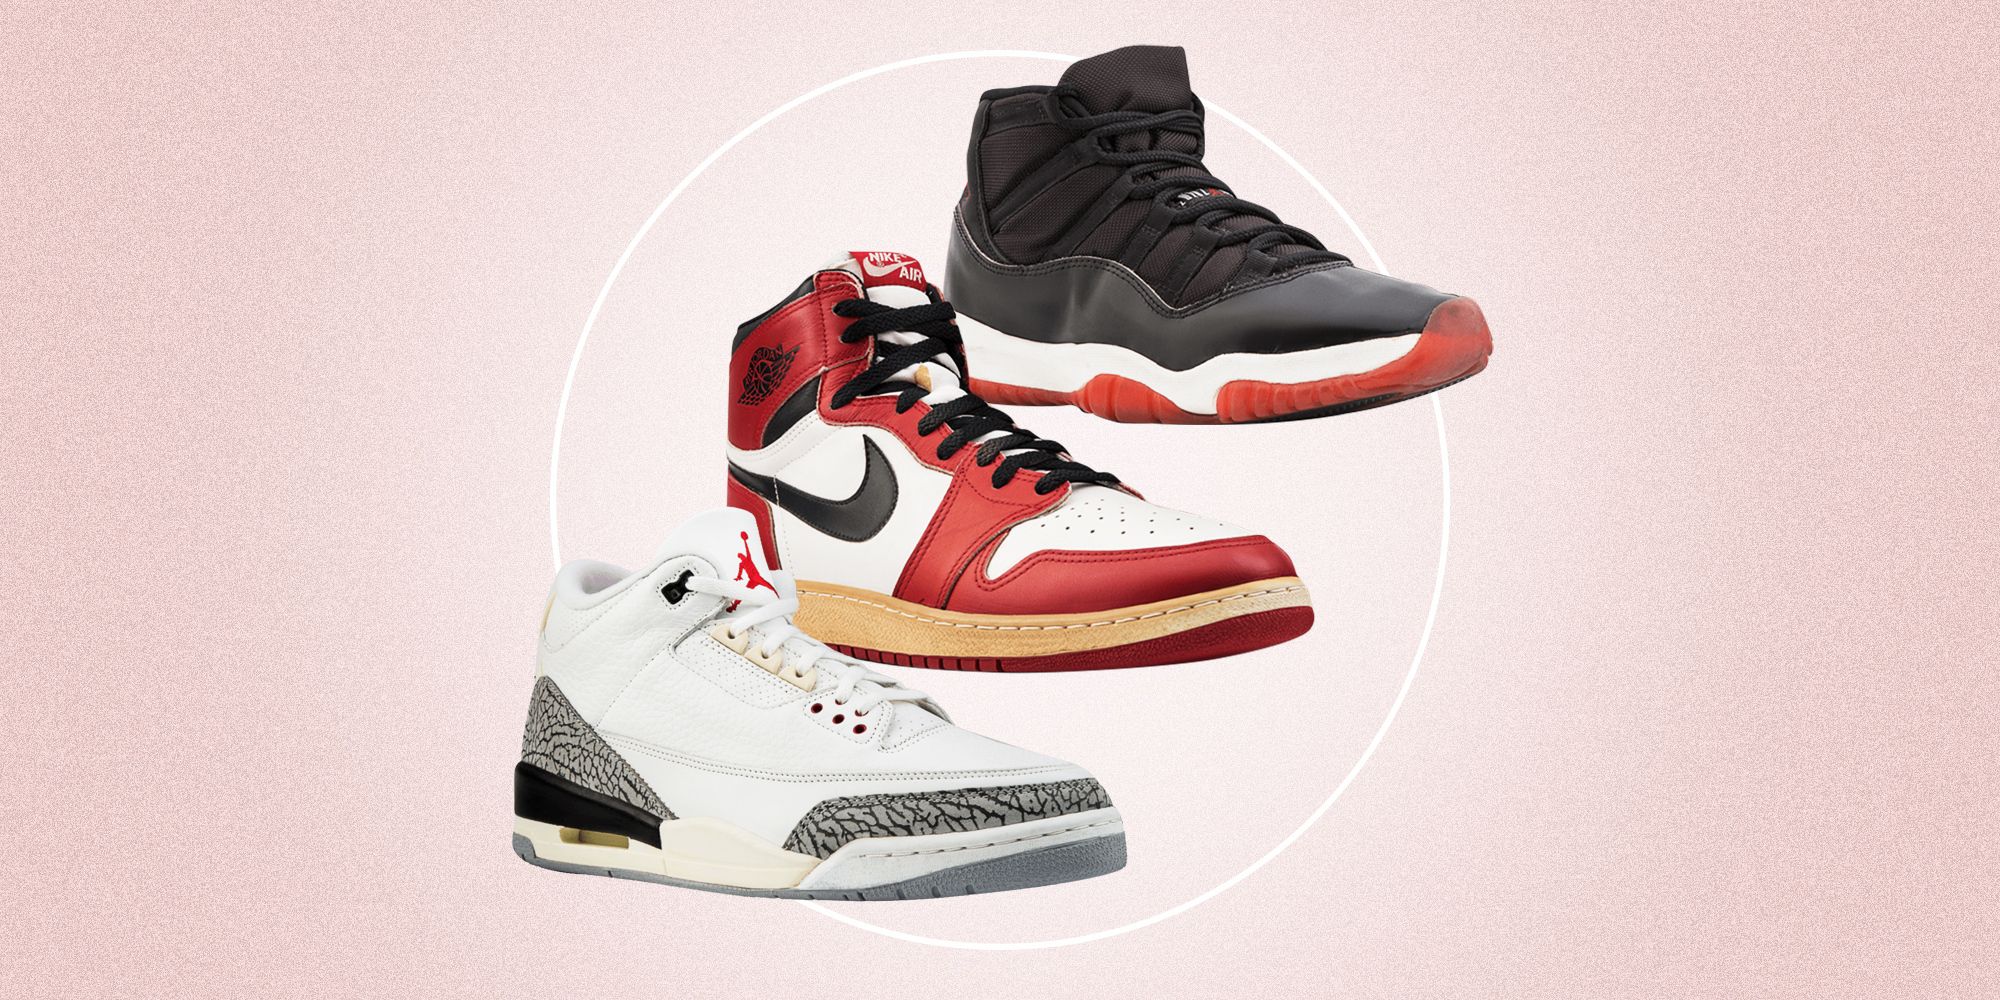 Nike Air vs. Jumpman Air: How Does Jordan Decide Which Label to Use?